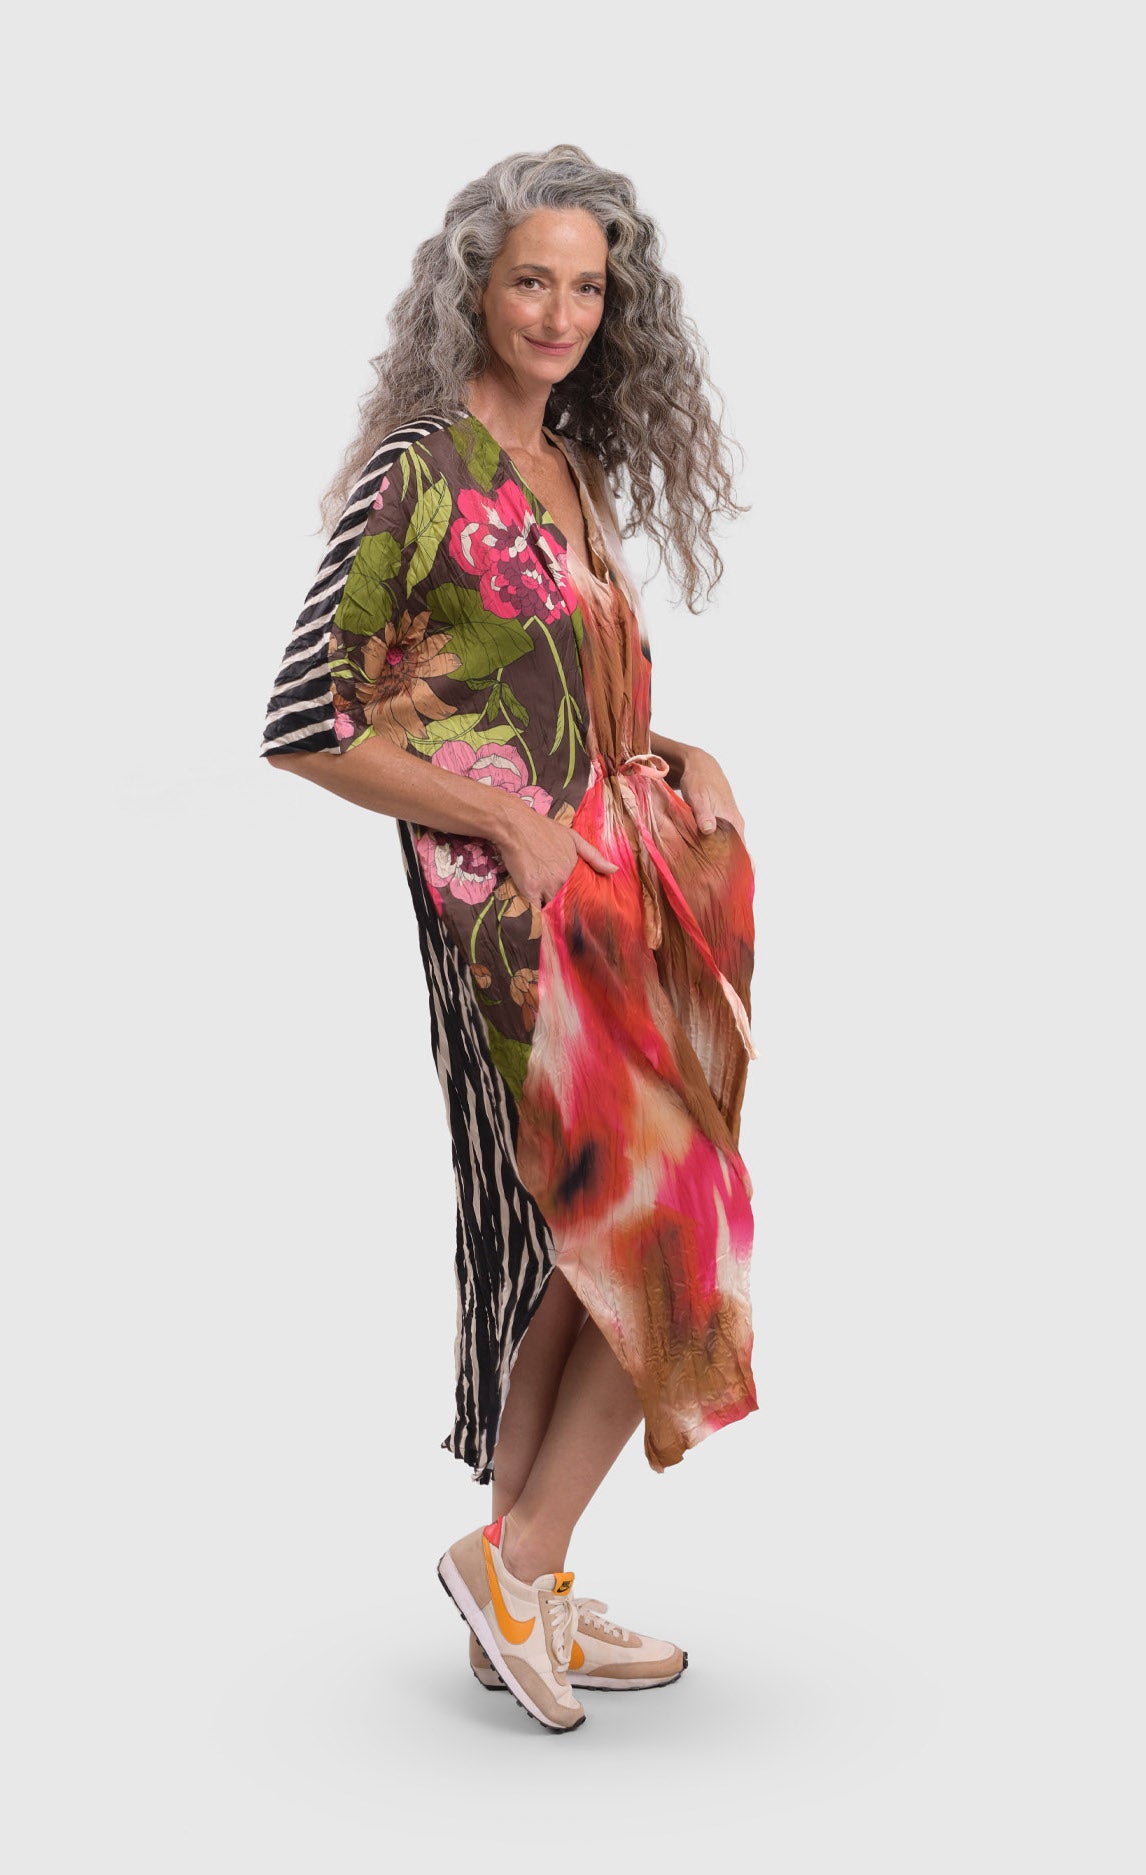 Front right side full body view of a woman wearing the alembika skye caftan butterfly dress. This dress has pink flowers over a brown backdrop on the right side, a pink and brown tie dye print in the center, a beige and brown tie dye print on the left side, and a black and white striped print on the back.